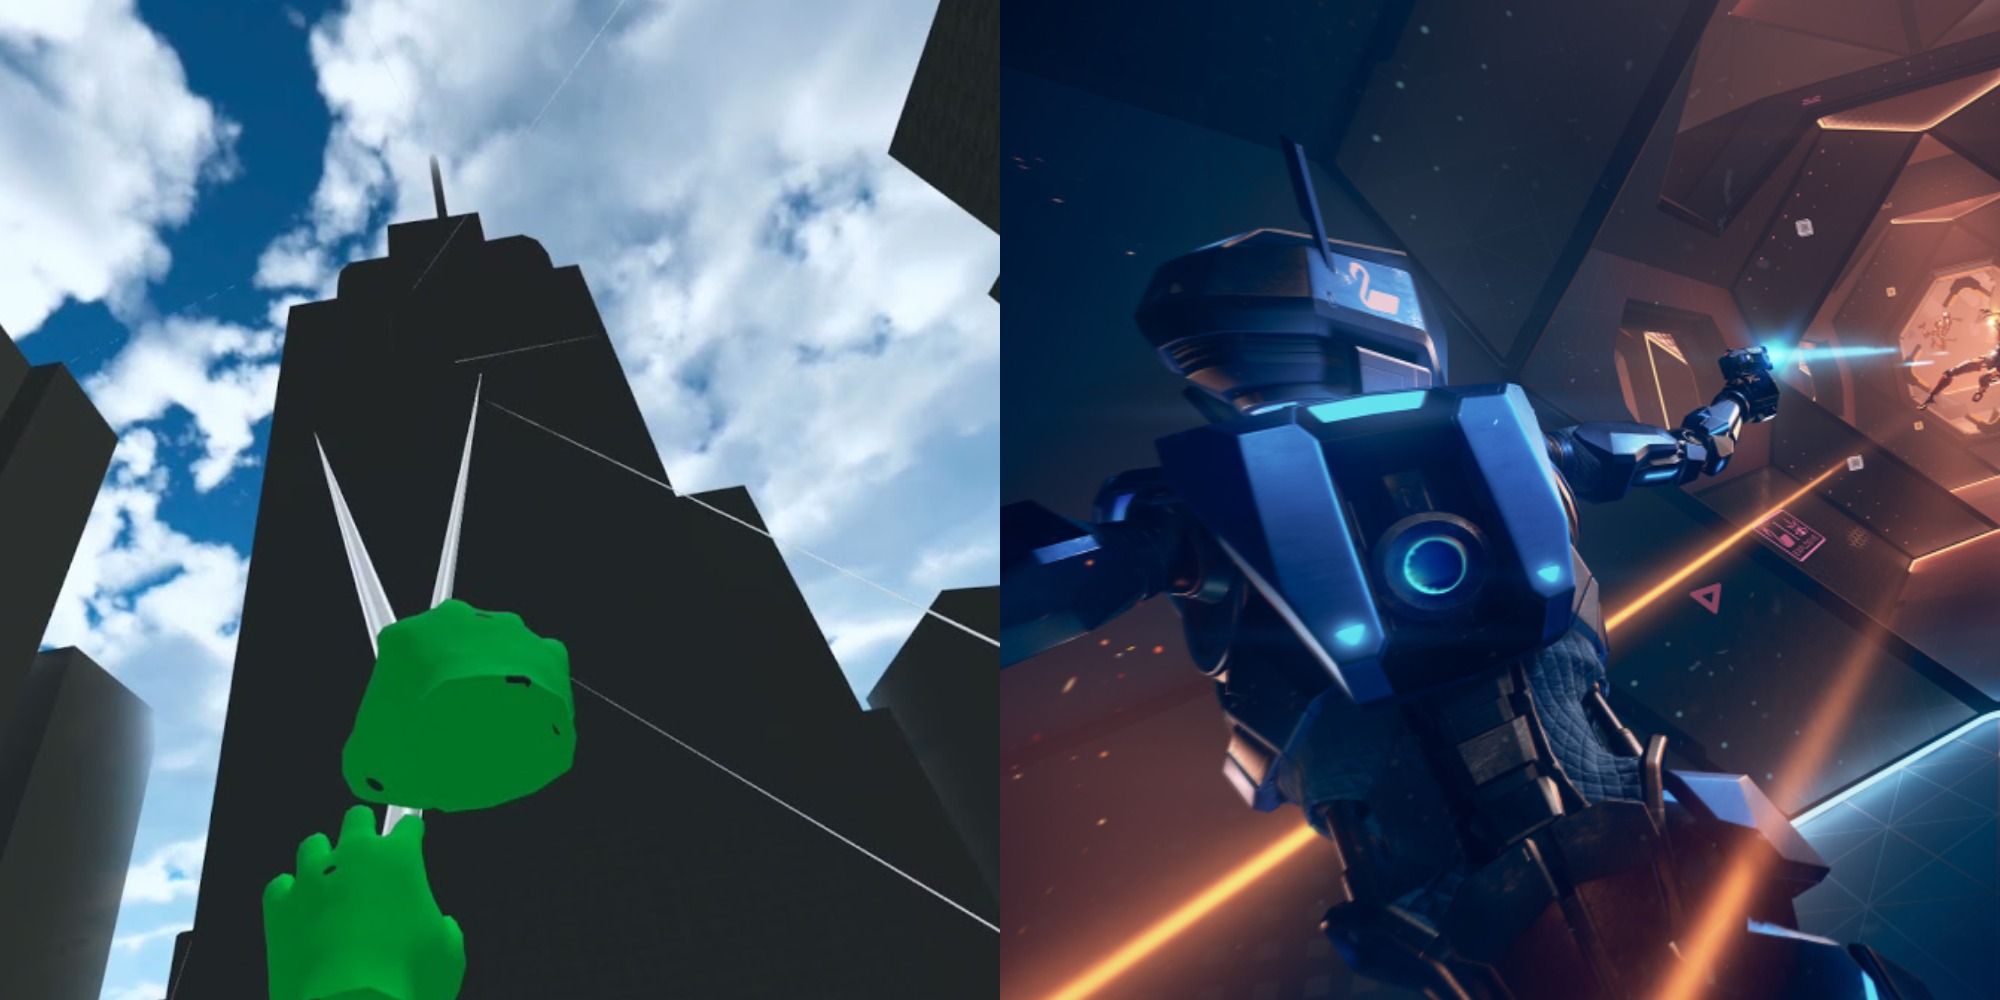 Split image of The Silkworm and Echo VR